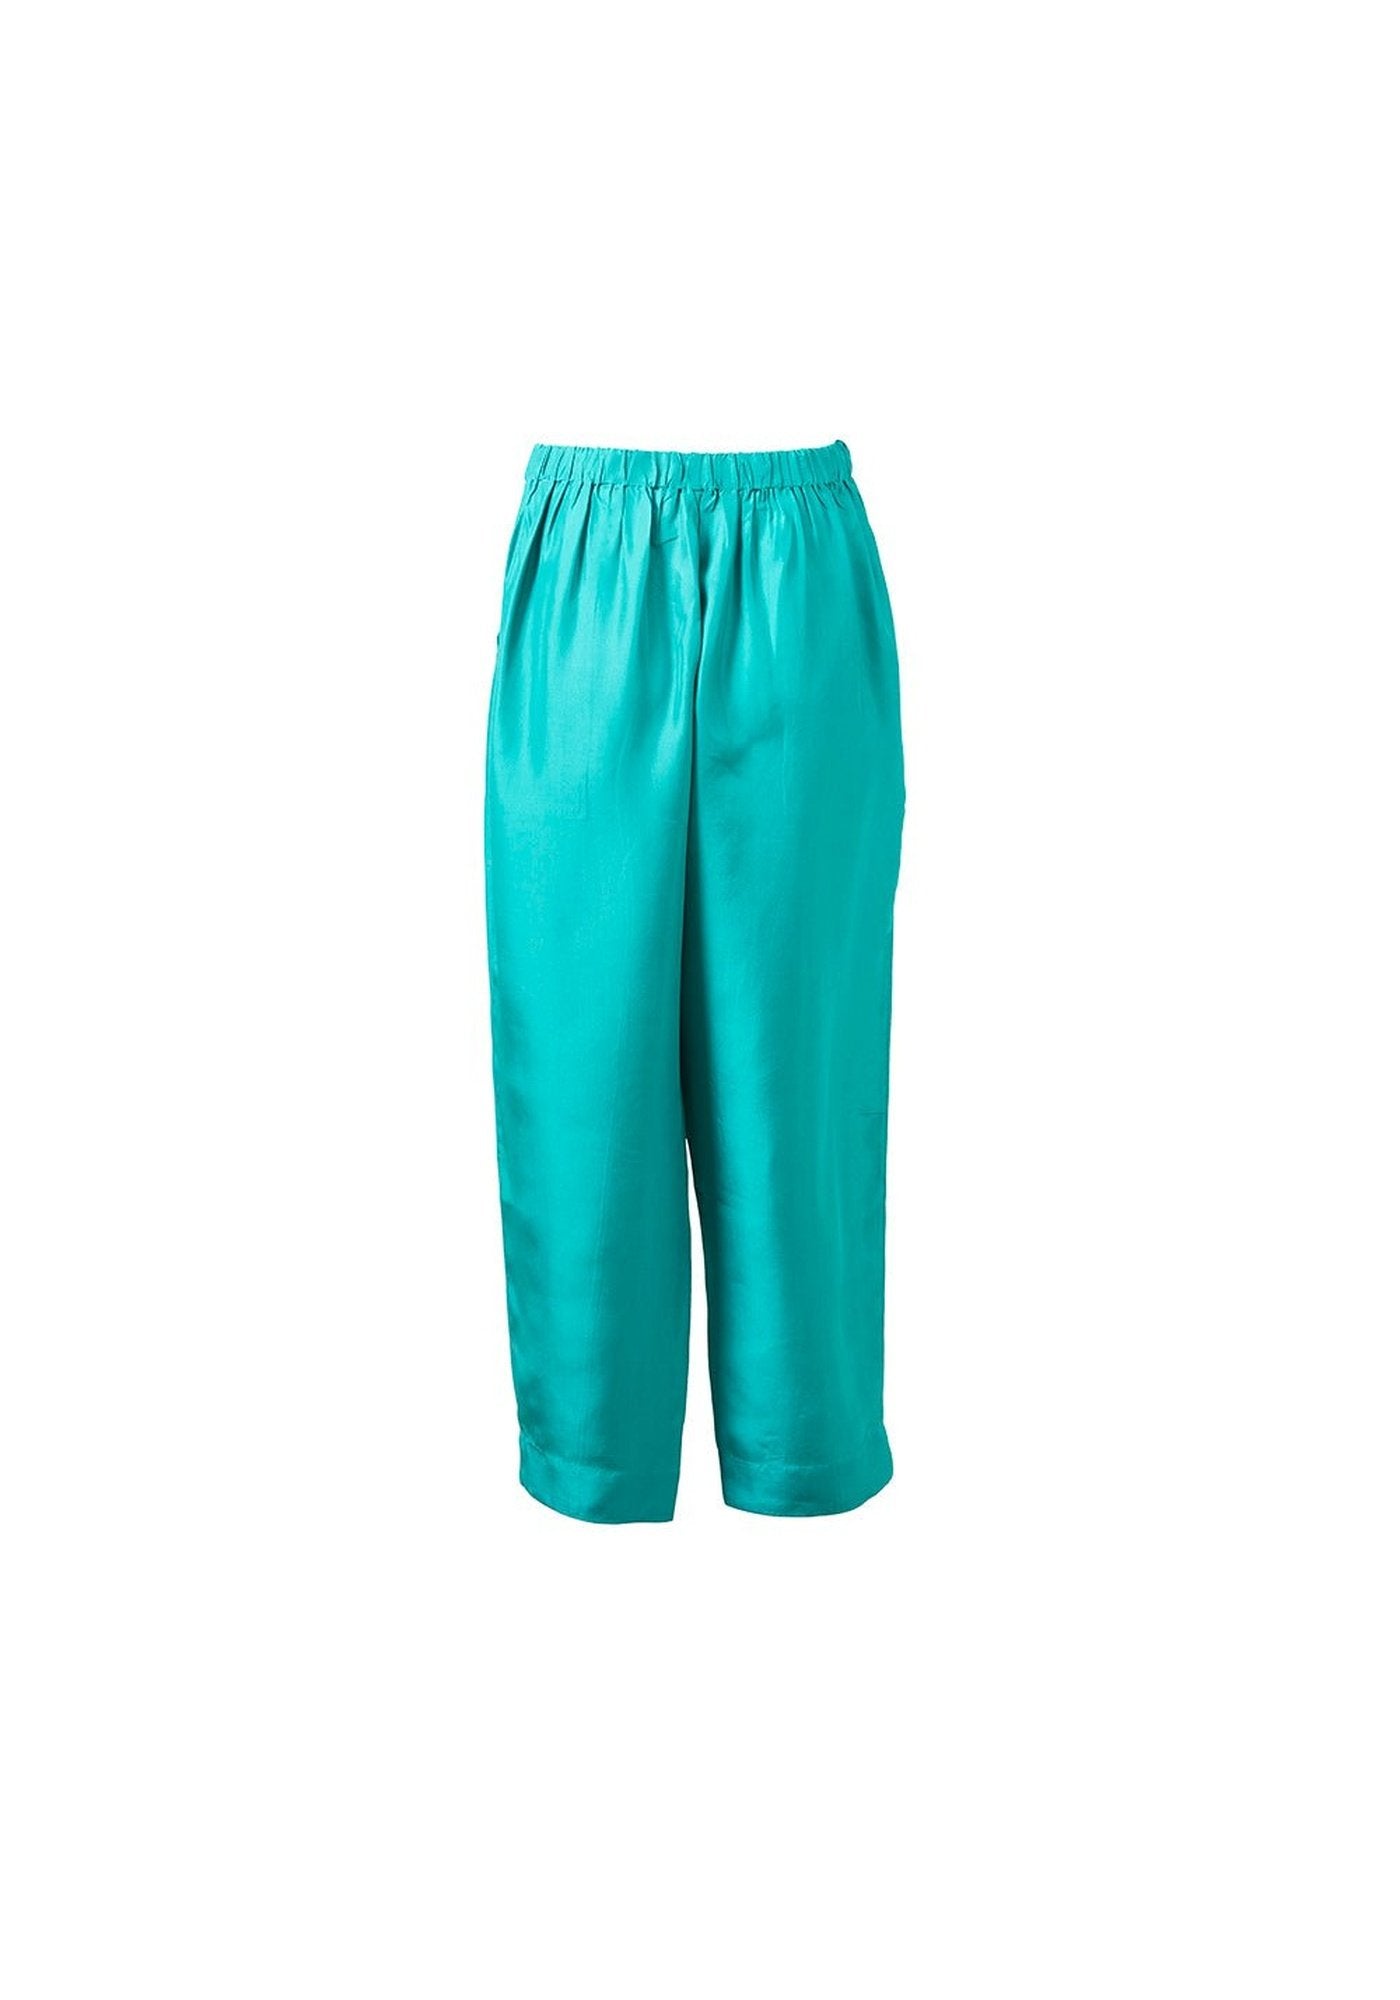 Trousers Still Teal Blue - Traces of Me